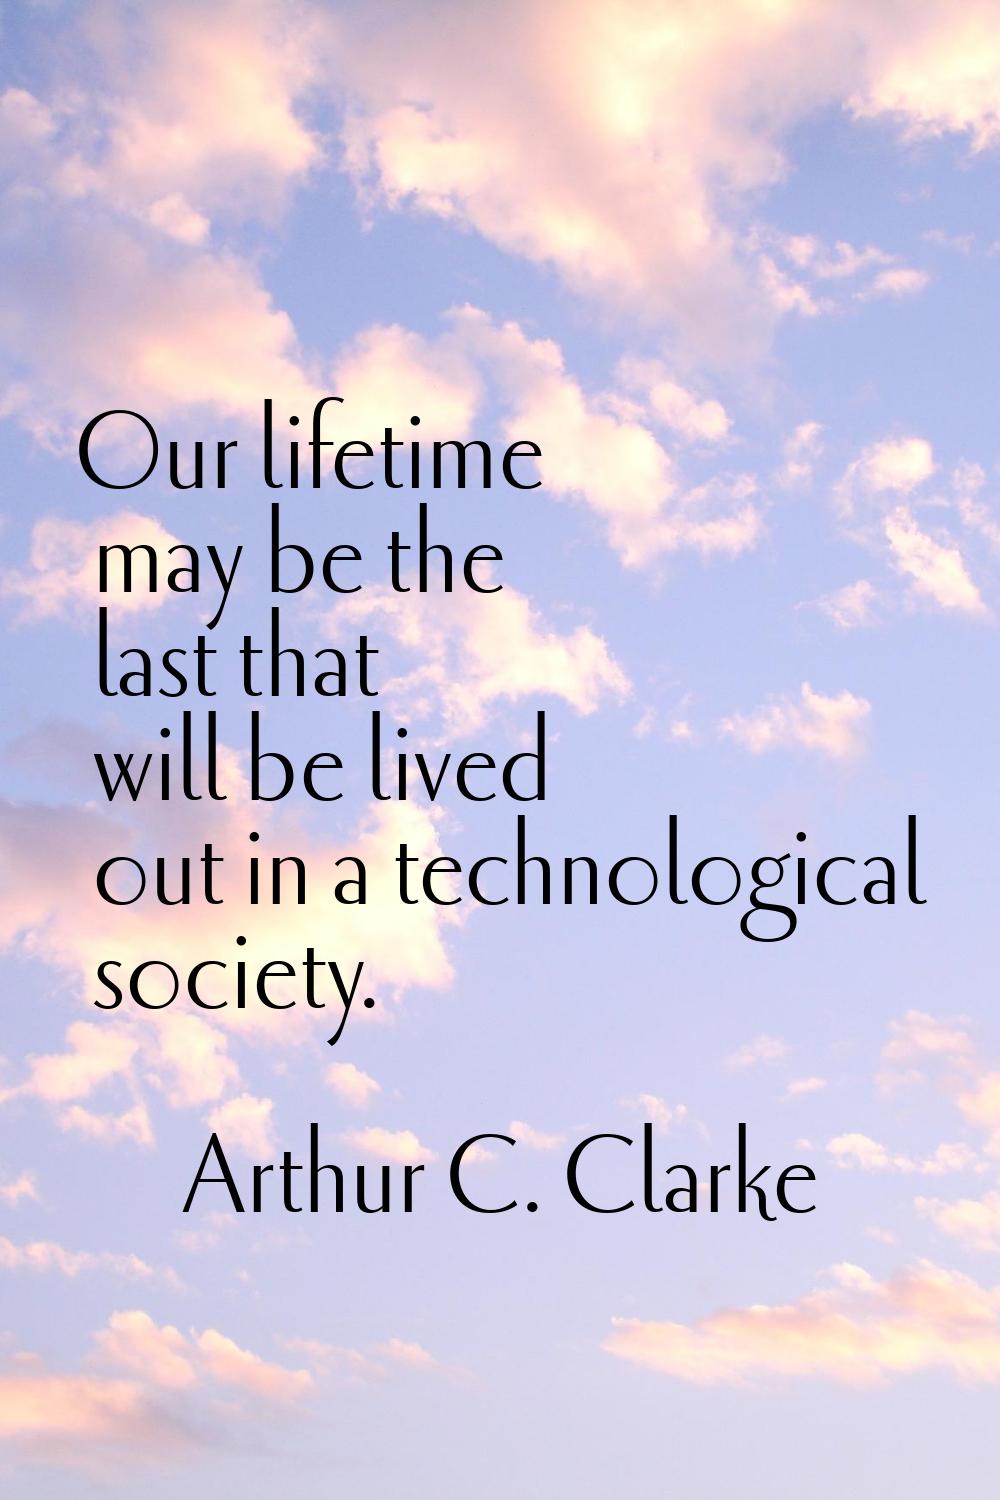 Our lifetime may be the last that will be lived out in a technological society.